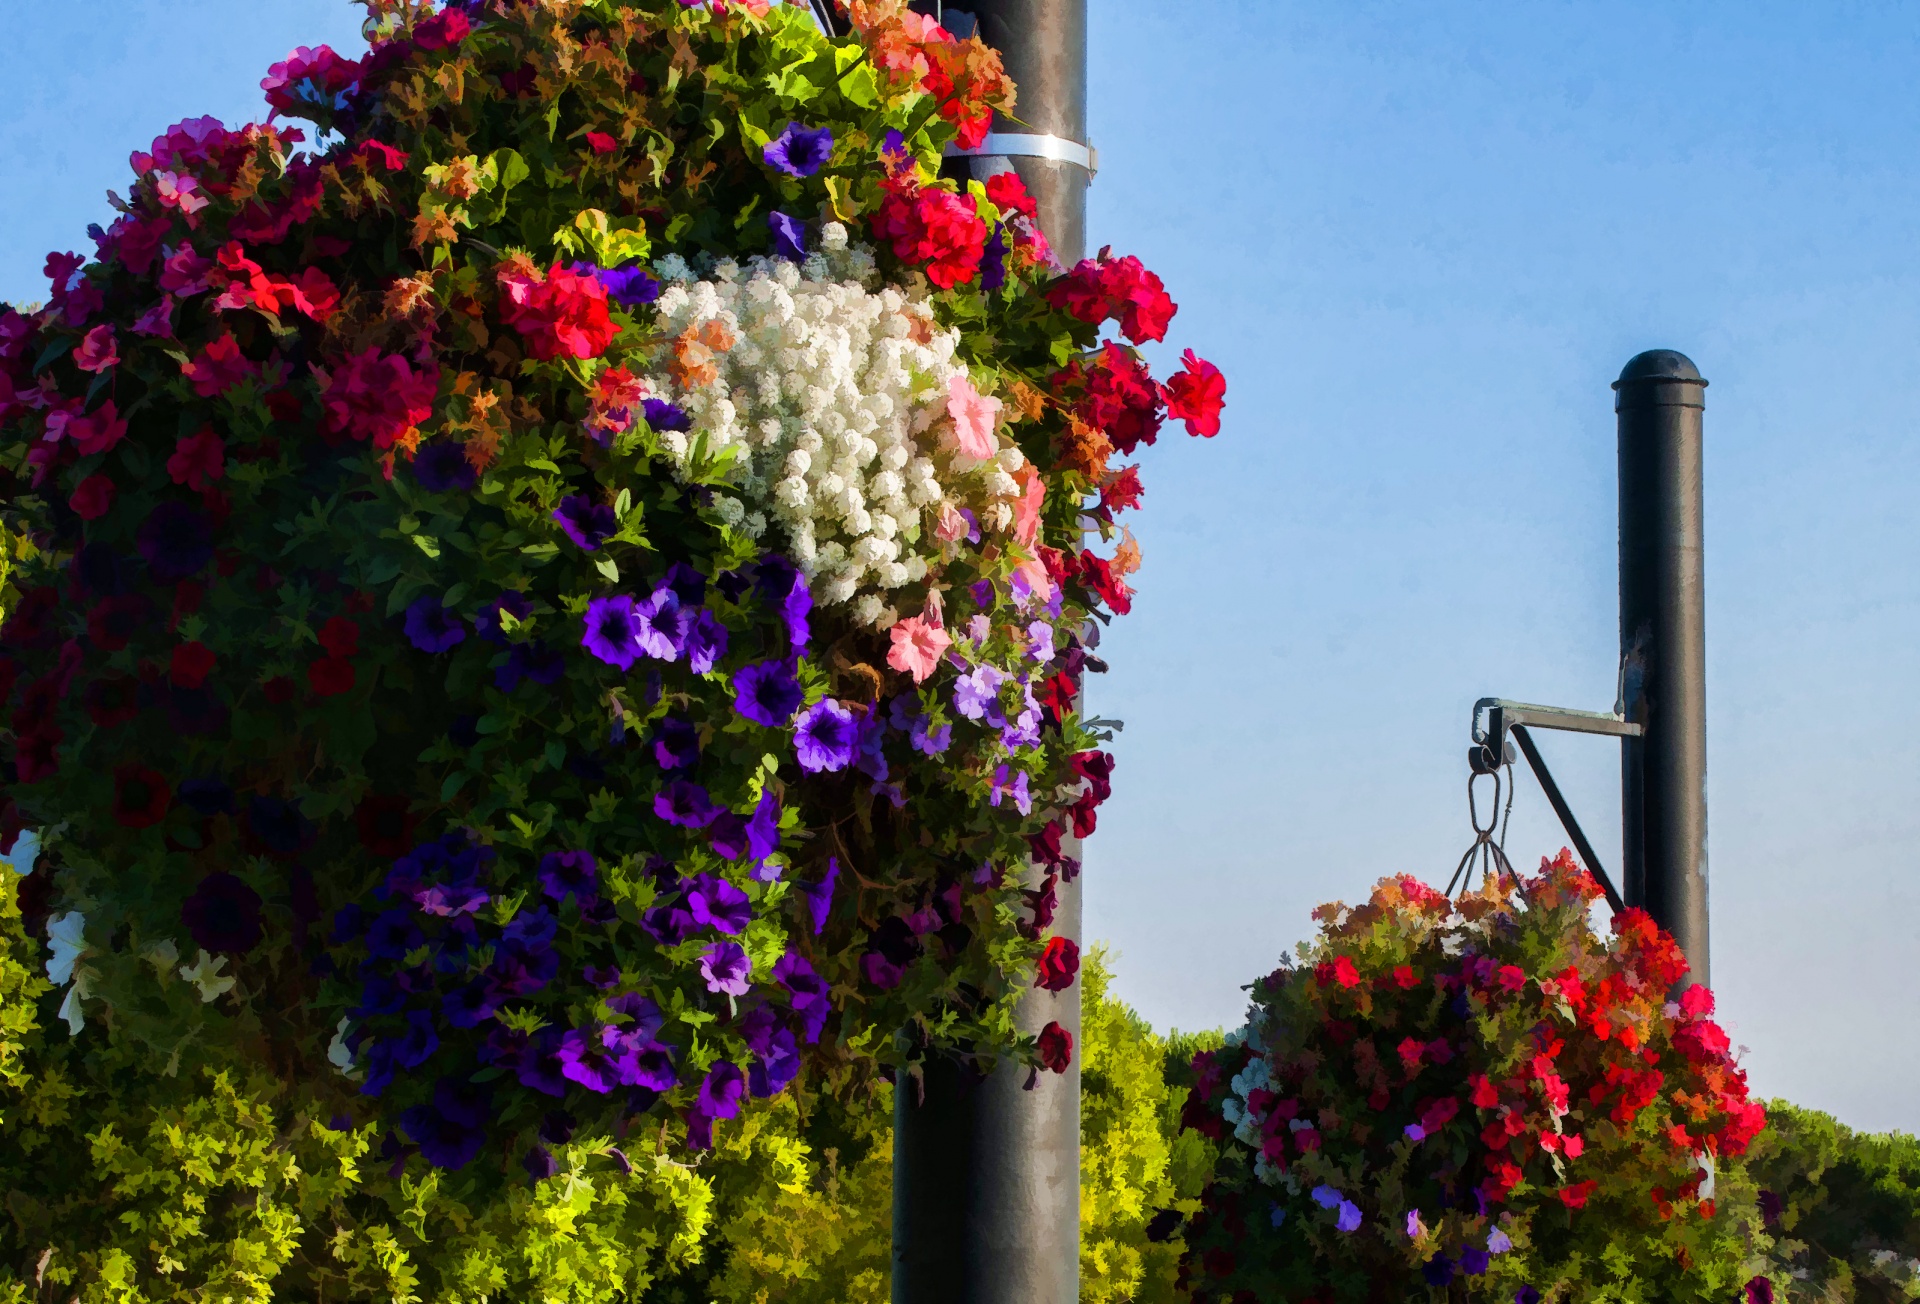 Hanging Baskets Of Flowers